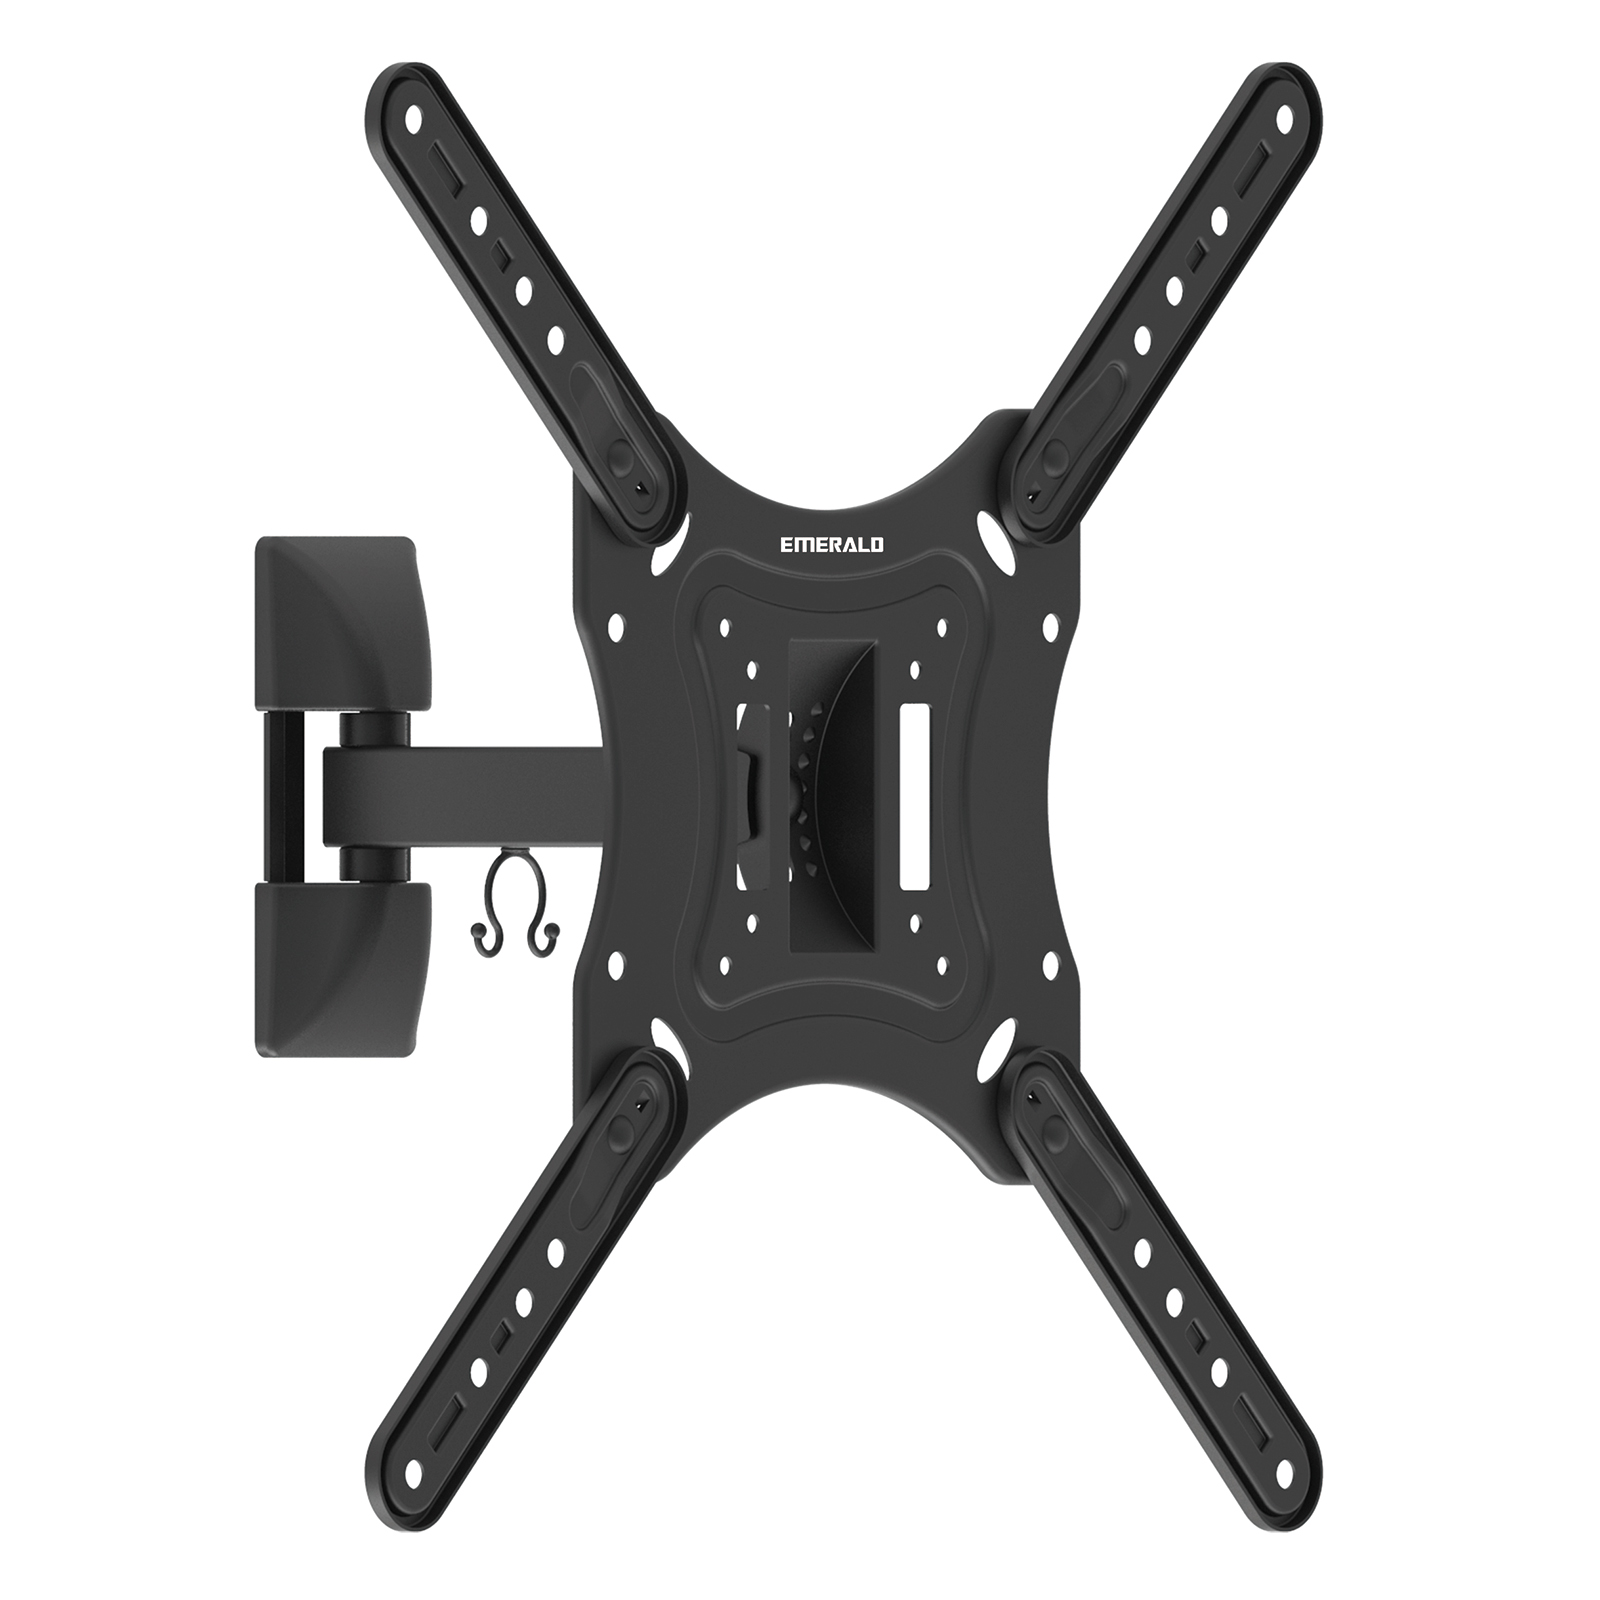 Emerald SM - 720 - 8079 Full Motion TV Wall Mount For 23" - 55" TVs